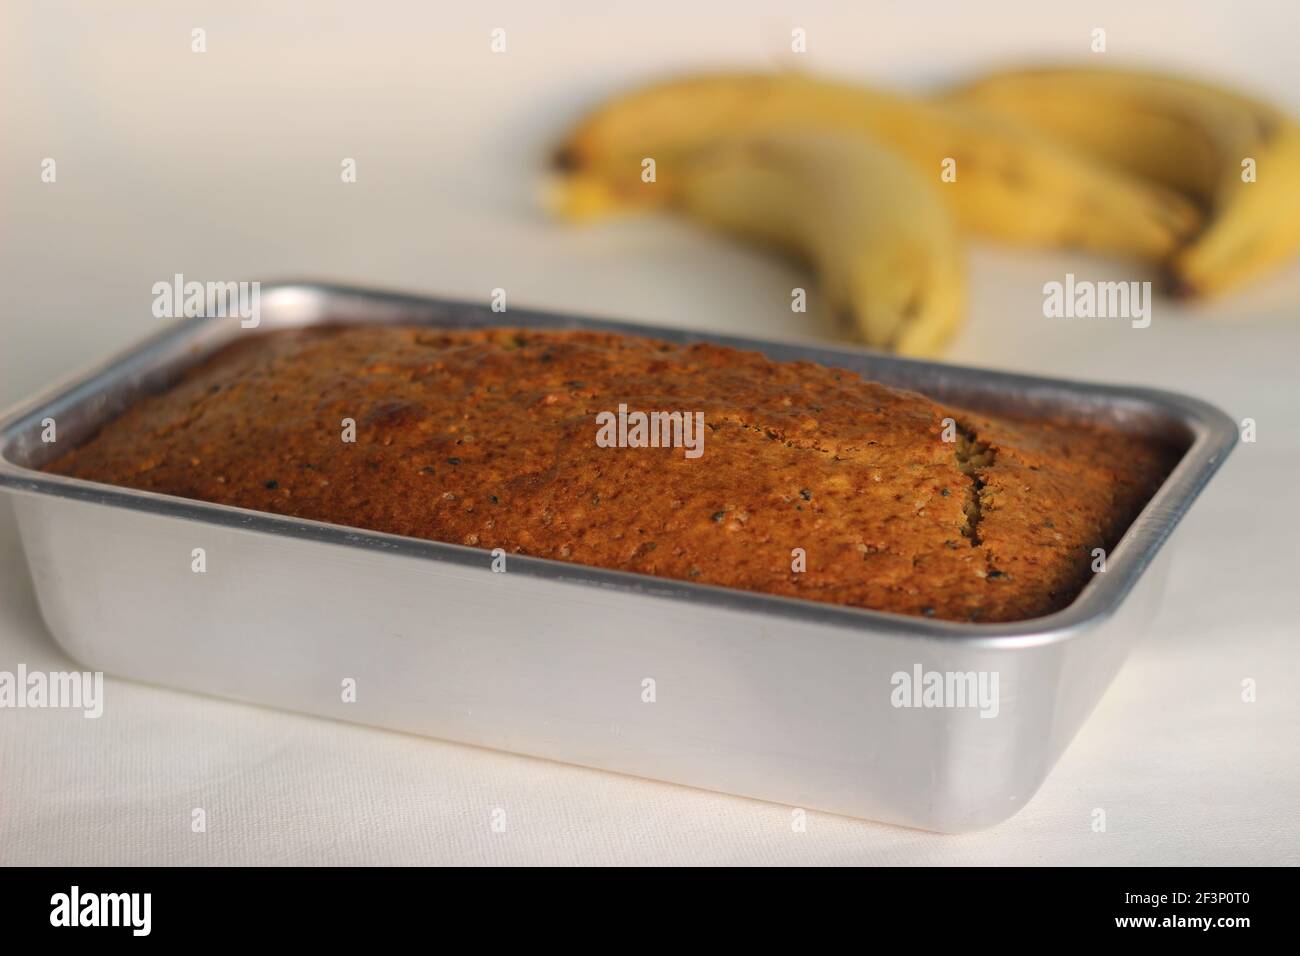 Home baked whole wheat ripe plantain cake. It is also called ripe plantain bread. Full loaf inside the loft tin. Shot on a white background Stock Photo